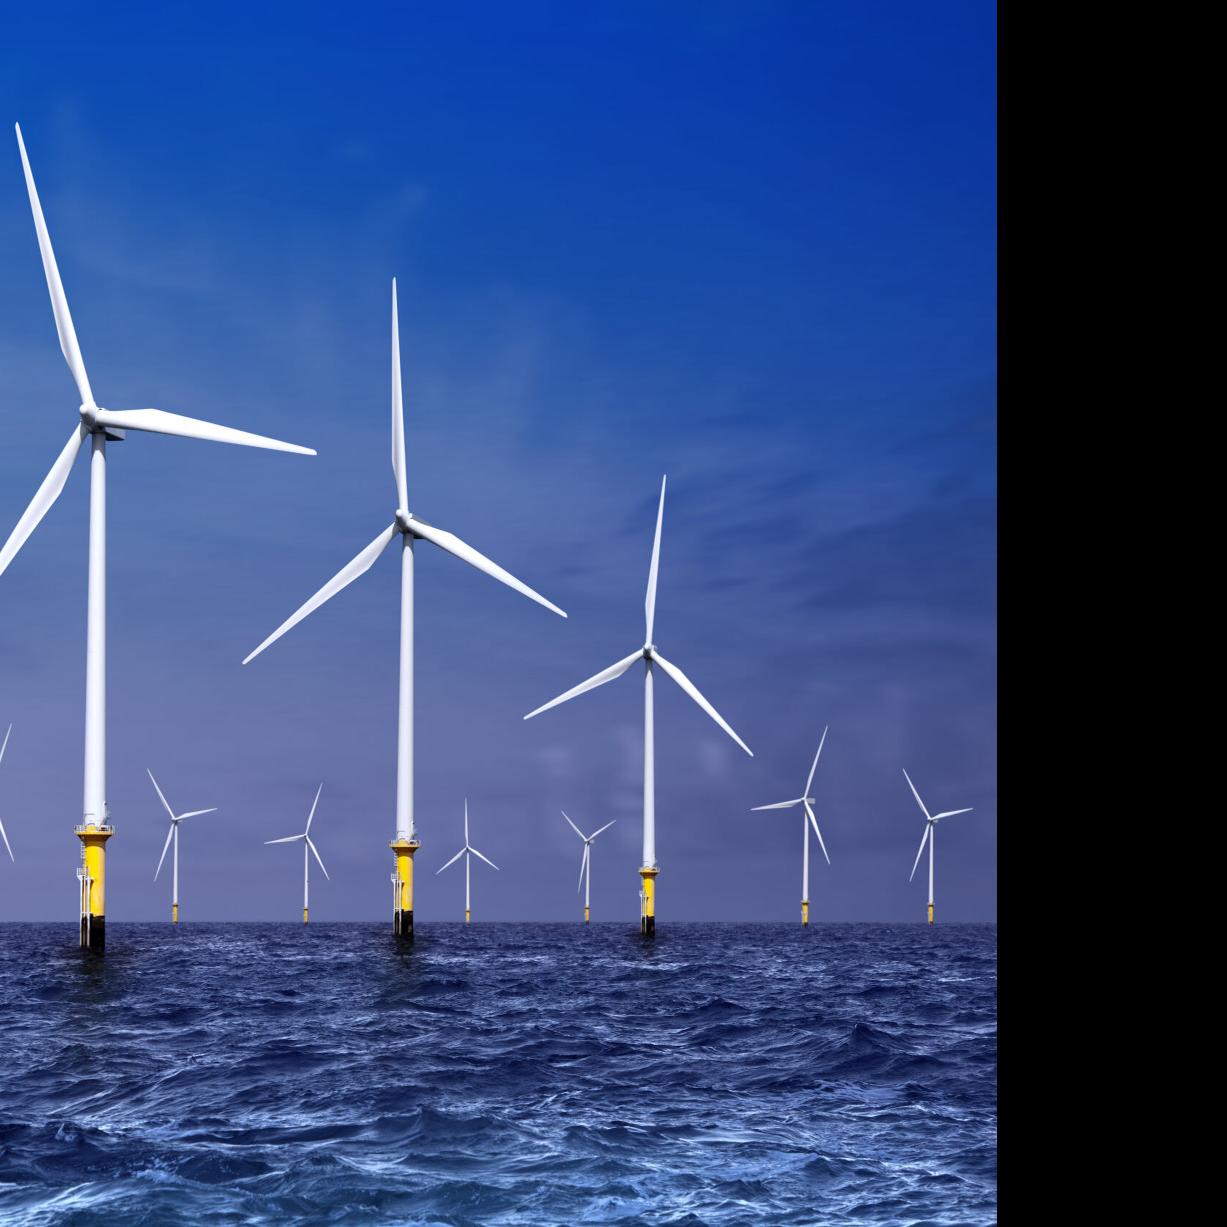 Feds get no bids to build offshore wind farms near the Texas coast